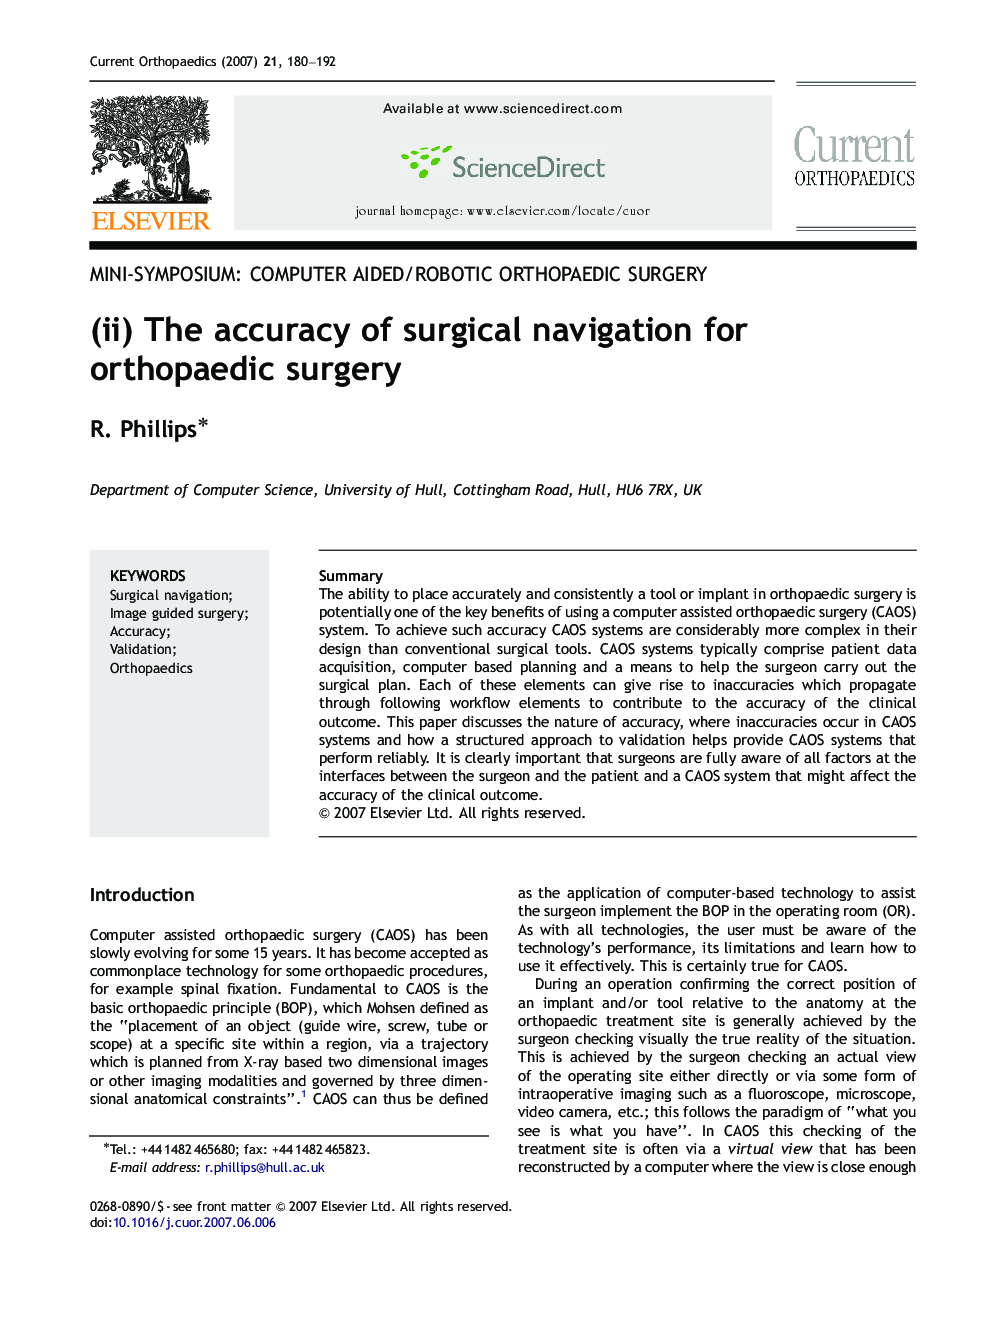 (ii) The accuracy of surgical navigation for orthopaedic surgery